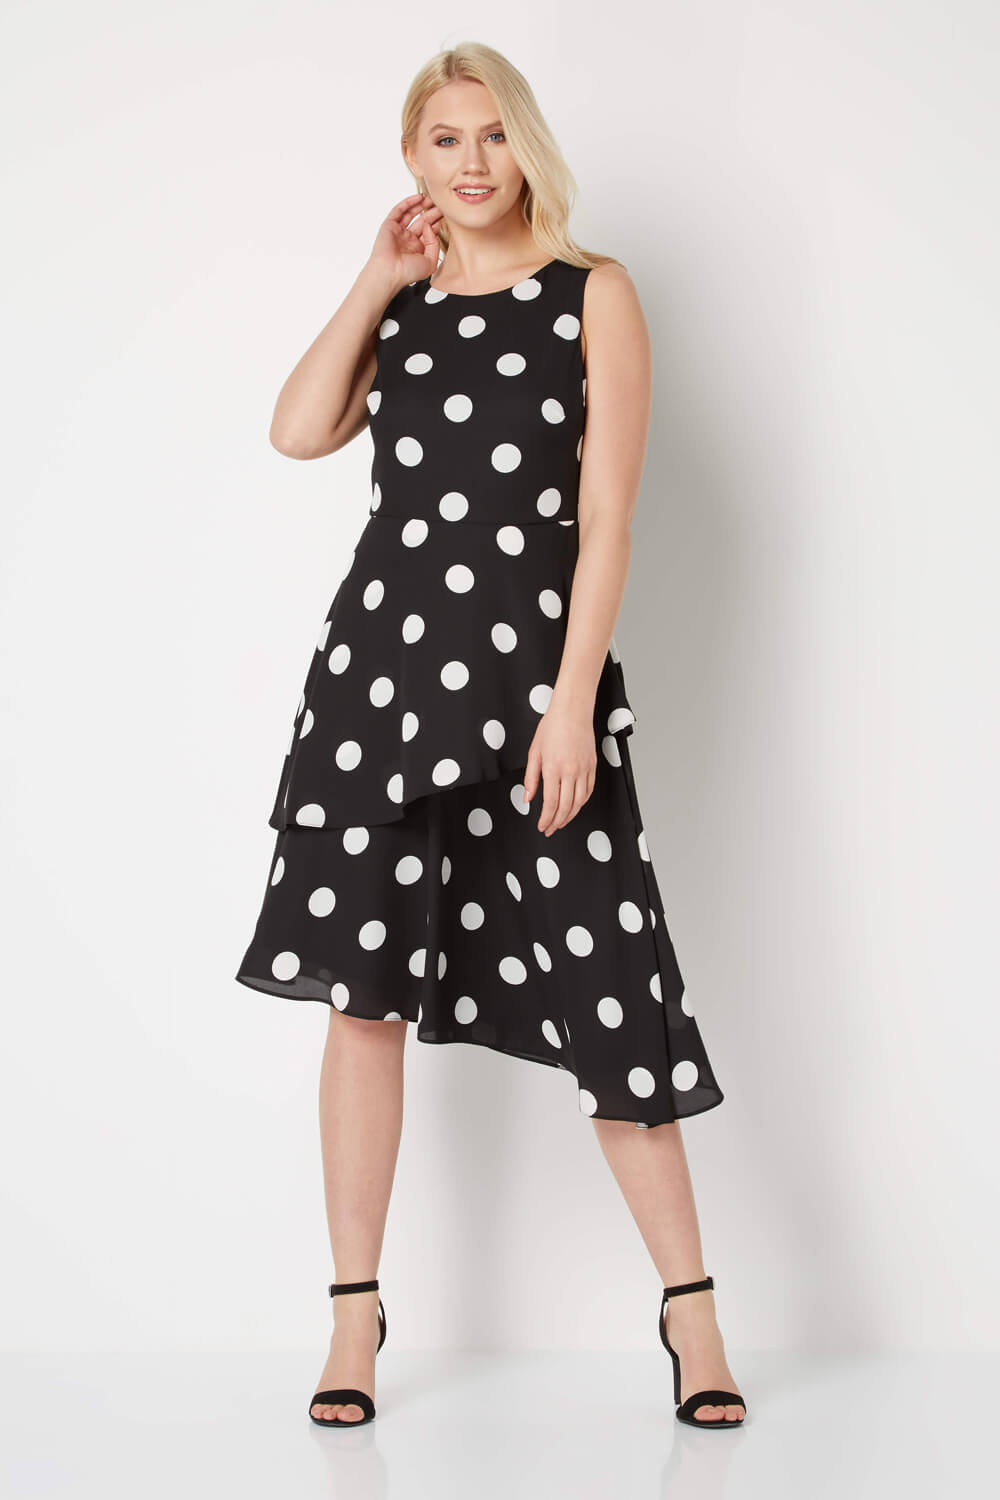 Black Spot Print Fit and Flare Dress, Image 2 of 5